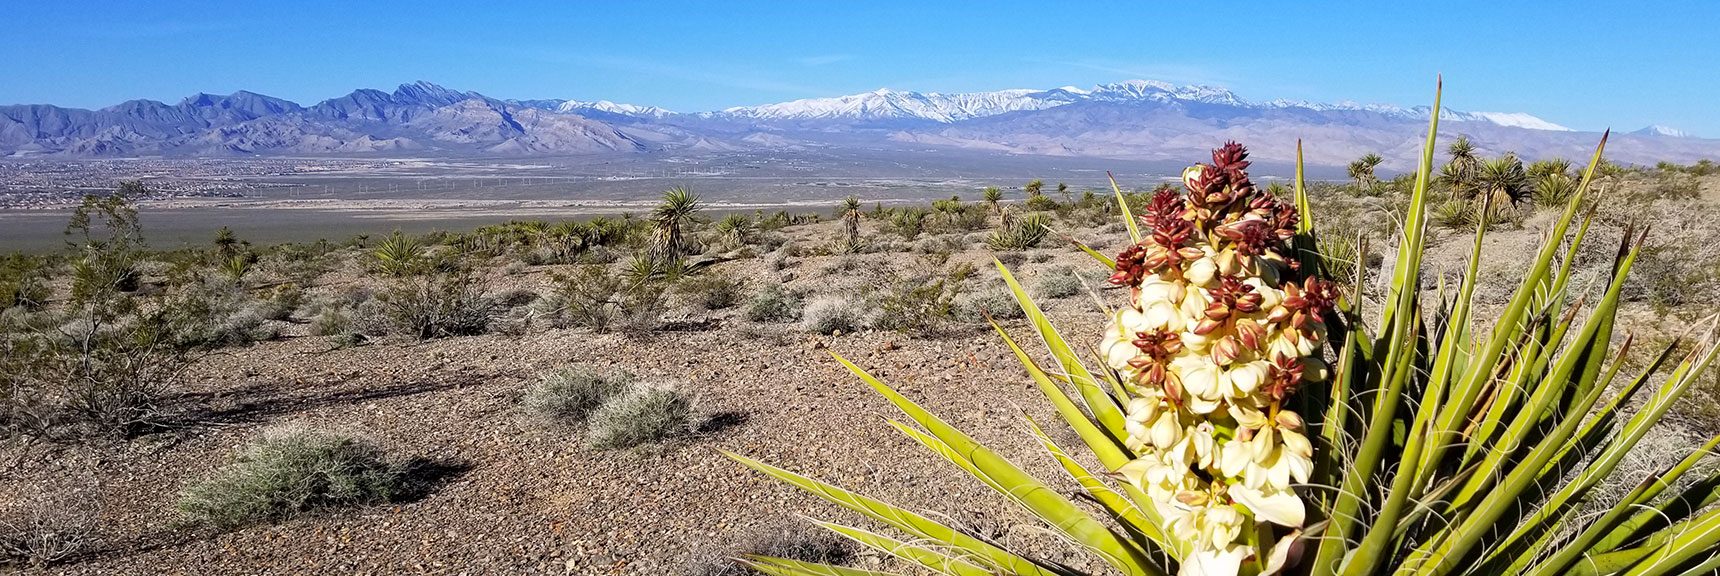 Yucca Plant in Bloom South of Gass Peak, Nevada